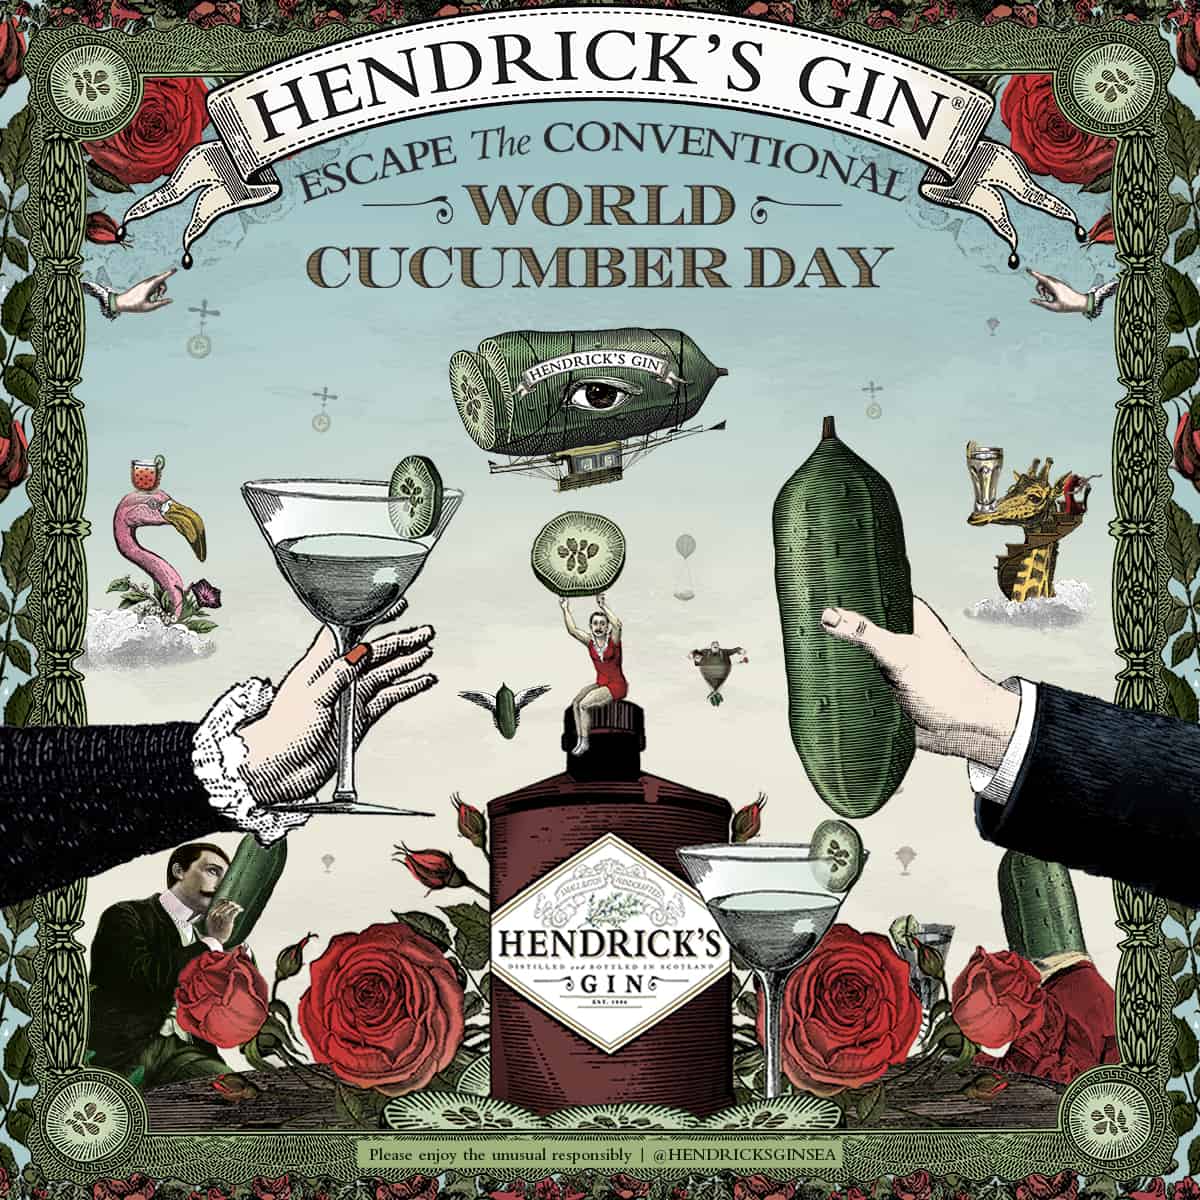 Embrace the whimsy – celebrate the cucumber with Hendrick's Gin